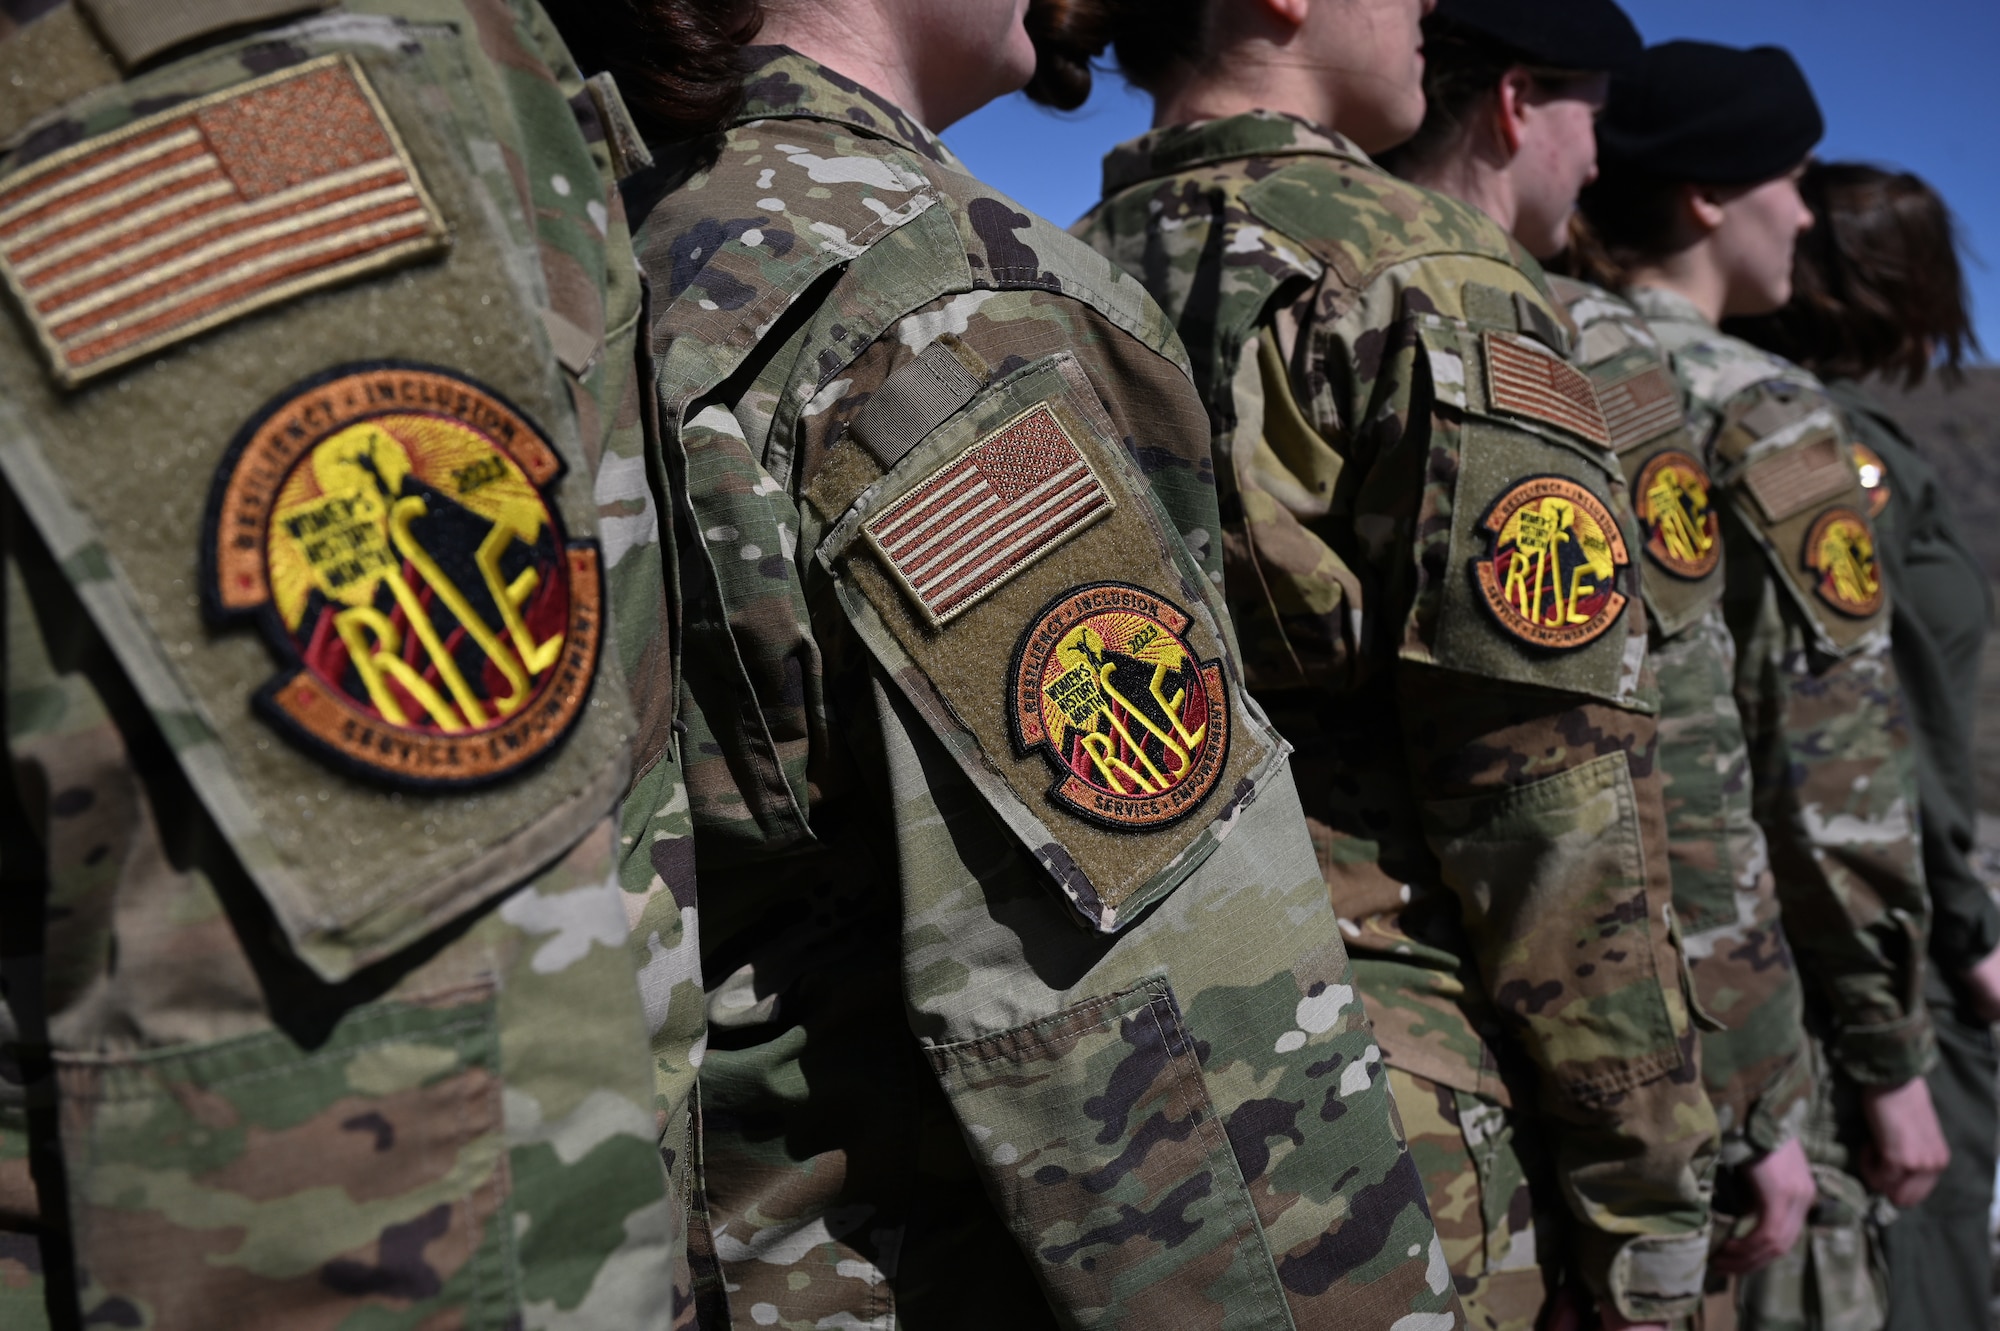 The sleeves of military uniforms are displayed in a row and adorned with a yellow and orange patch which reads, "RISE."